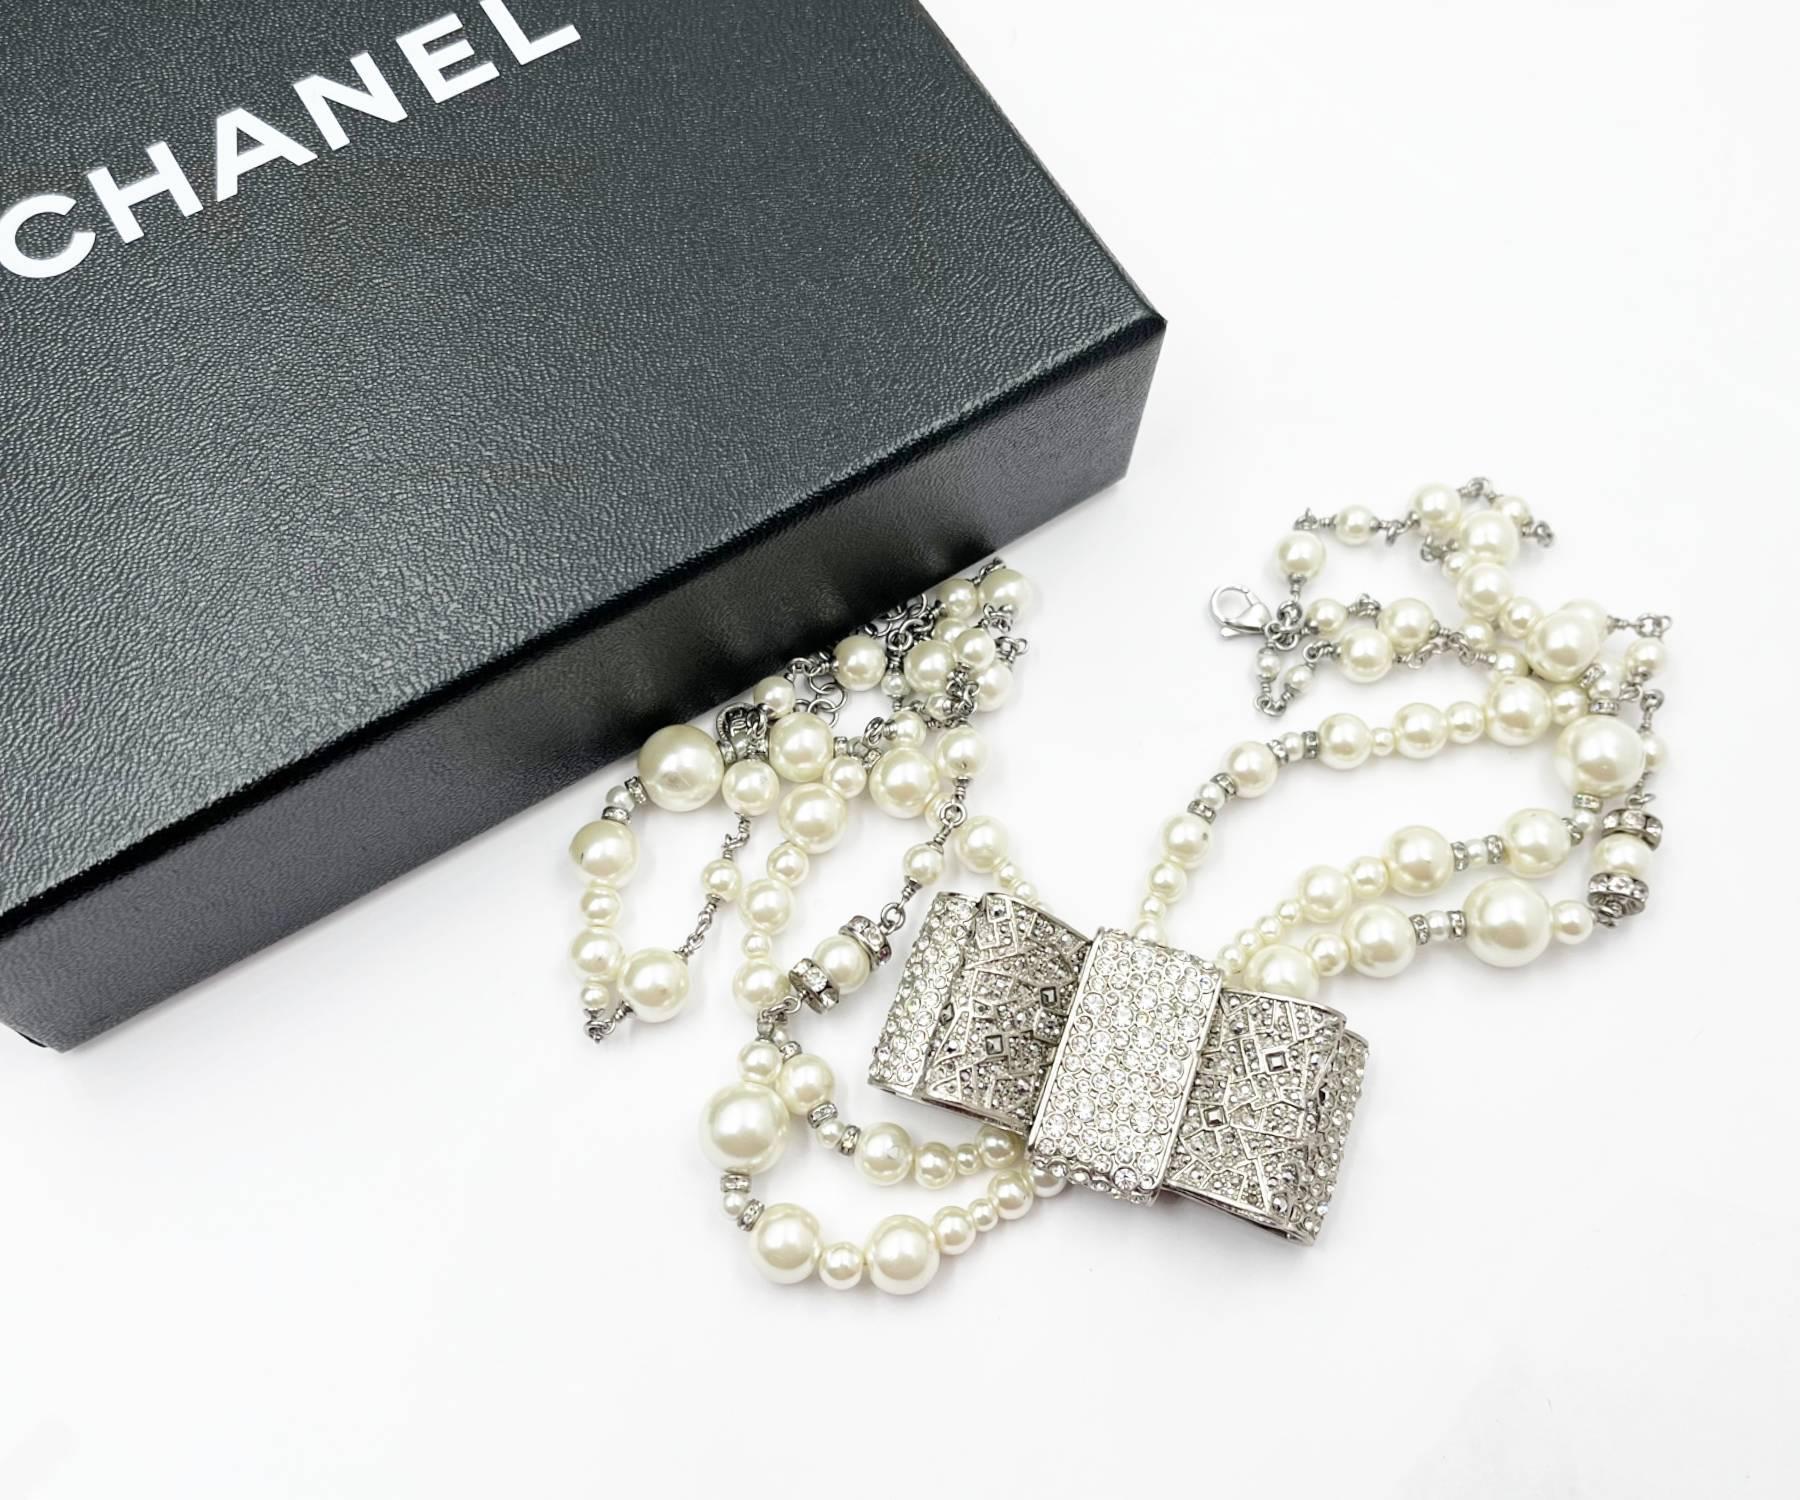 Chanel Rare Silver Large Bow Crystal 3 Strand Pearl Necklace

*Marked 13
*Made in France
*Comes with original box

-The chain is approximately 15″ to 17″ long.
-The pendant is approximately 1.3″ x 2.3″ total.
-Very classic and shiny
-In a pristine